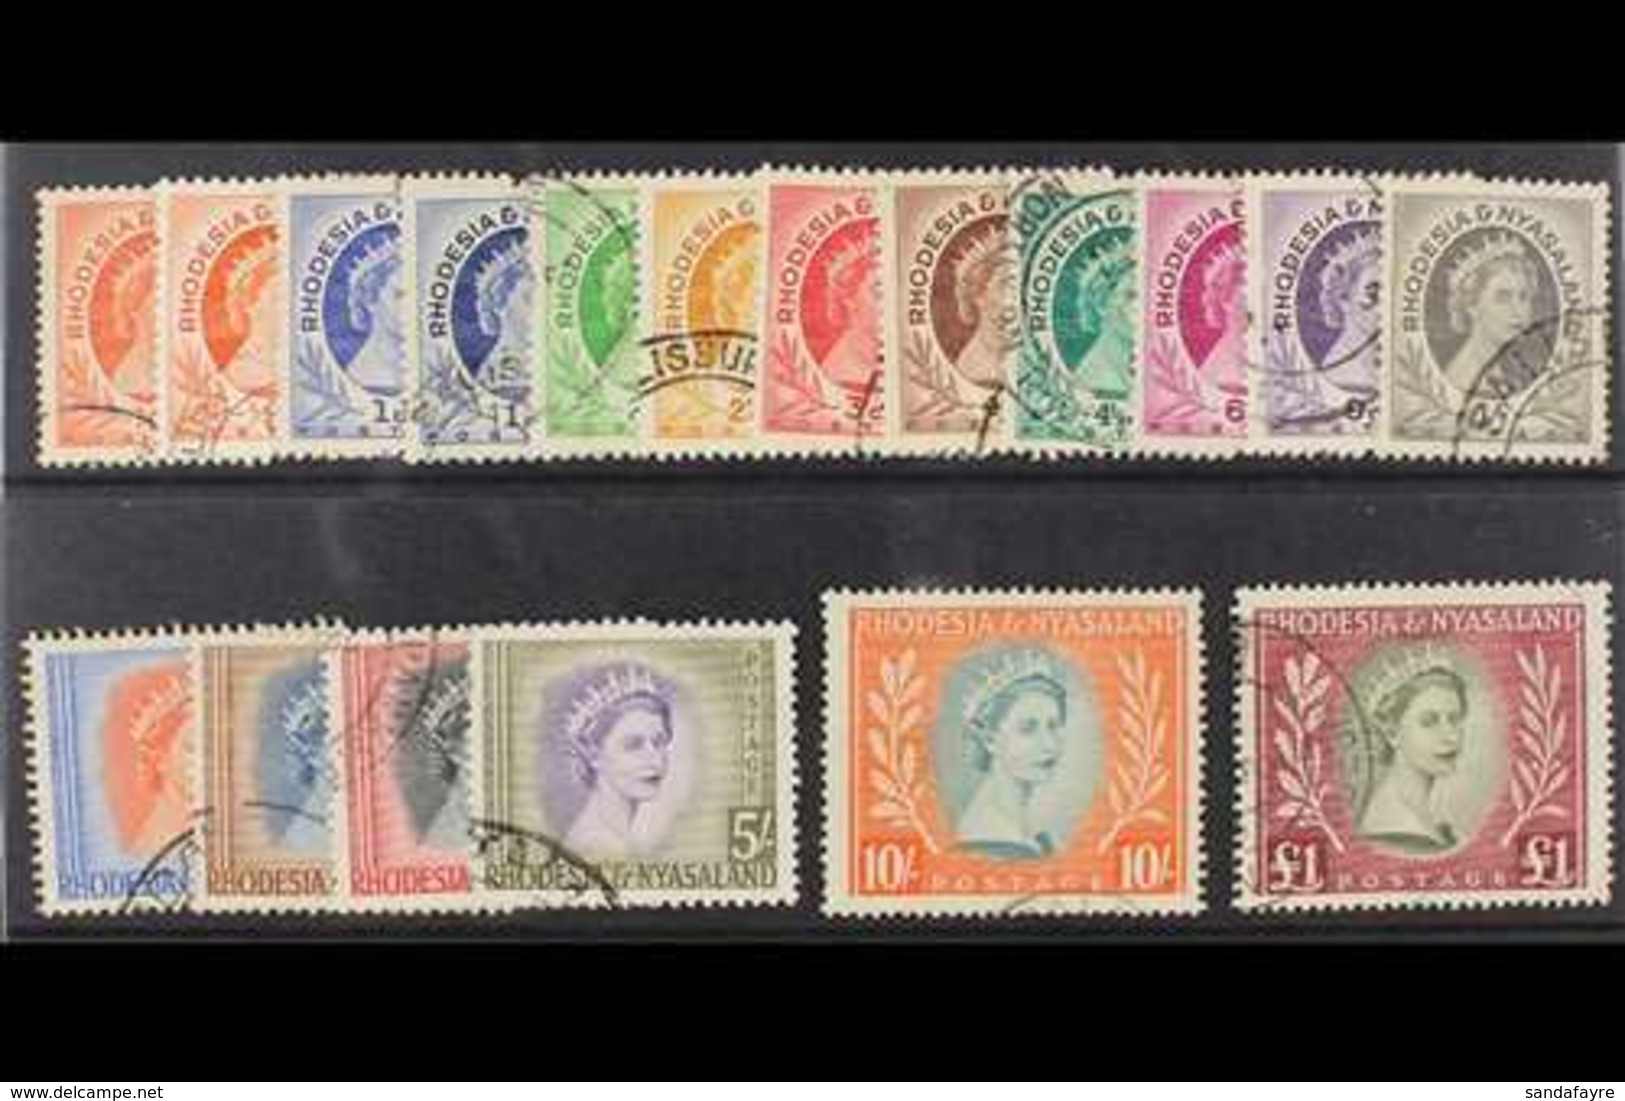 1954-56 QEII Definitives Complete Set, SG 1/15, Plus The ½d And 1d Coil Stamps, SG 1a And 2a, Very Fine Used. (18 Stamps - Rhodesia & Nyasaland (1954-1963)